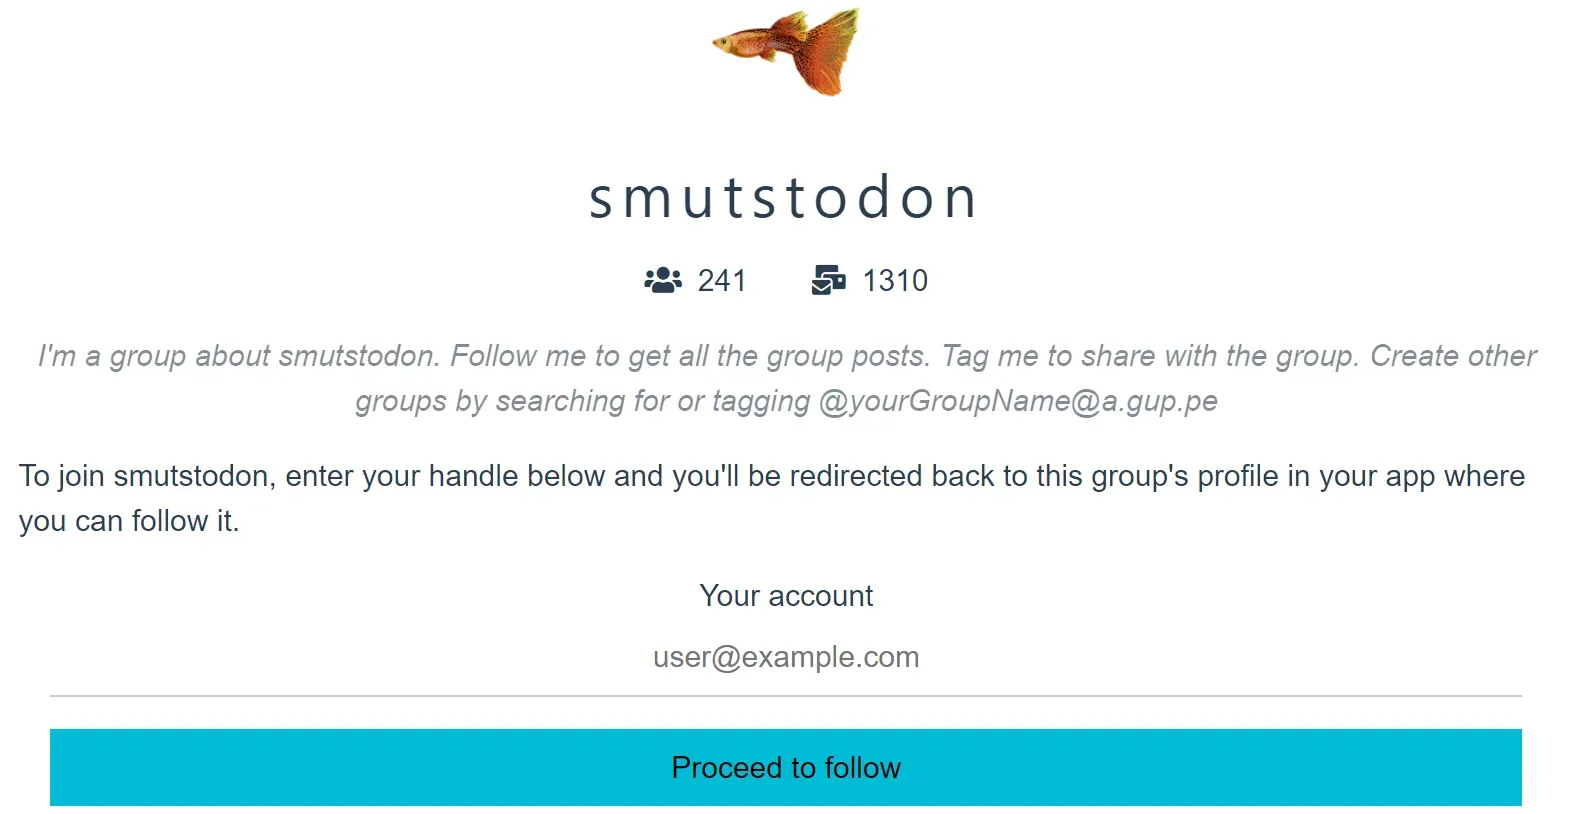 Screenshot of the smutstodon group website with the goldfish logo, the title smutstodon and the follower and post count. There is a form and a blue button to follow the group at the bottom.